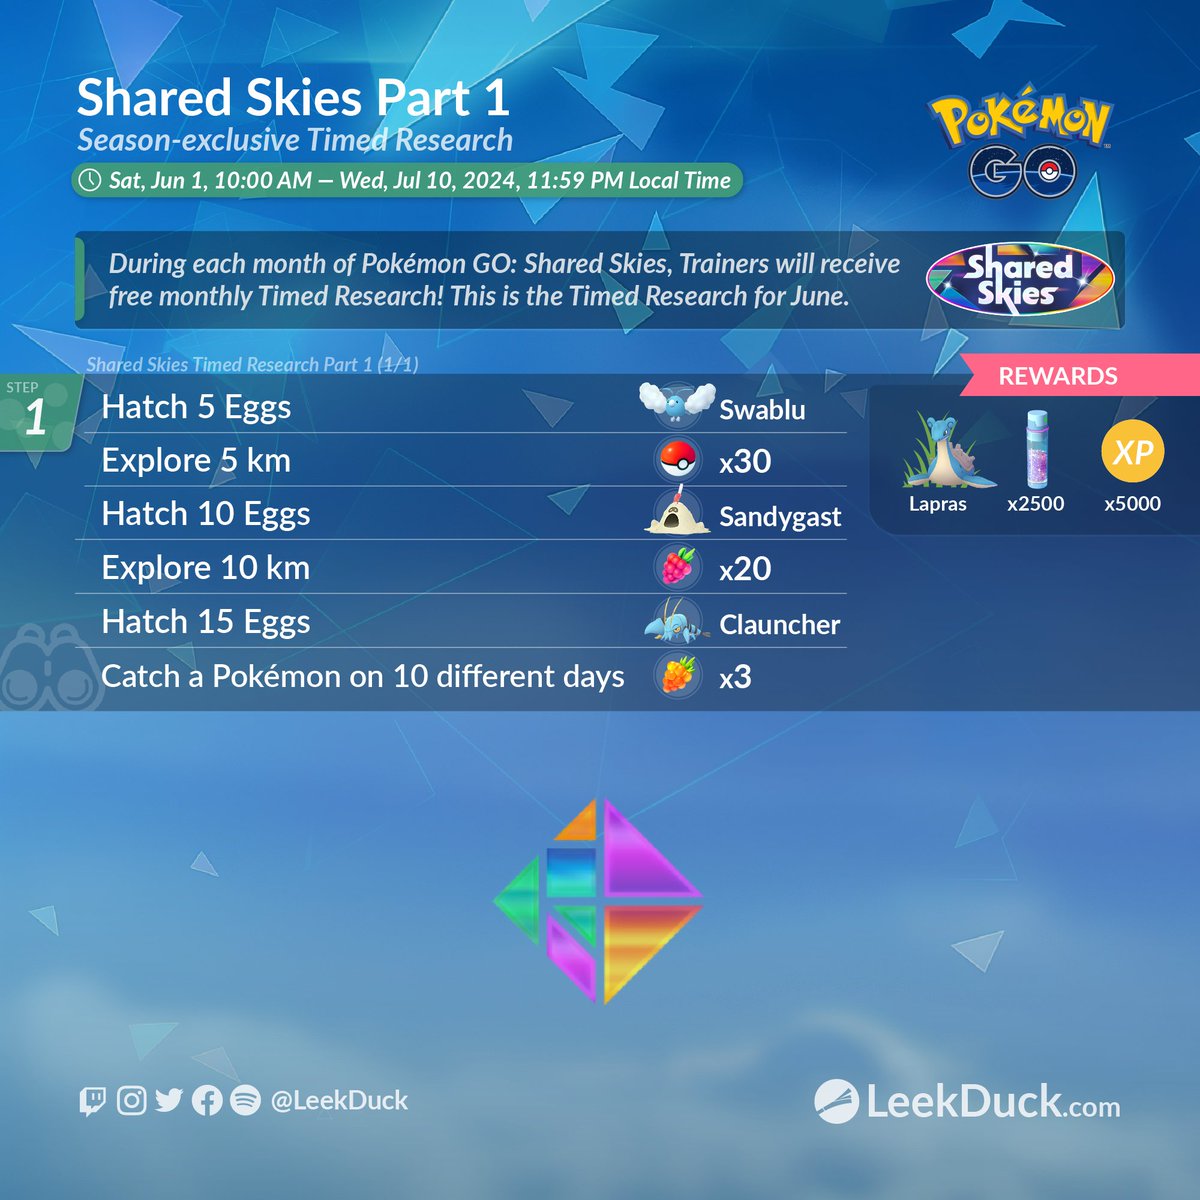 Shared Skies Timed Research Part 1 

• During each month of Pokémon GO: Shared Skies, Trainers will receive free monthly Timed Research! This is the Timed Research for June. 

Full Details: leekduck.com/events/season-…